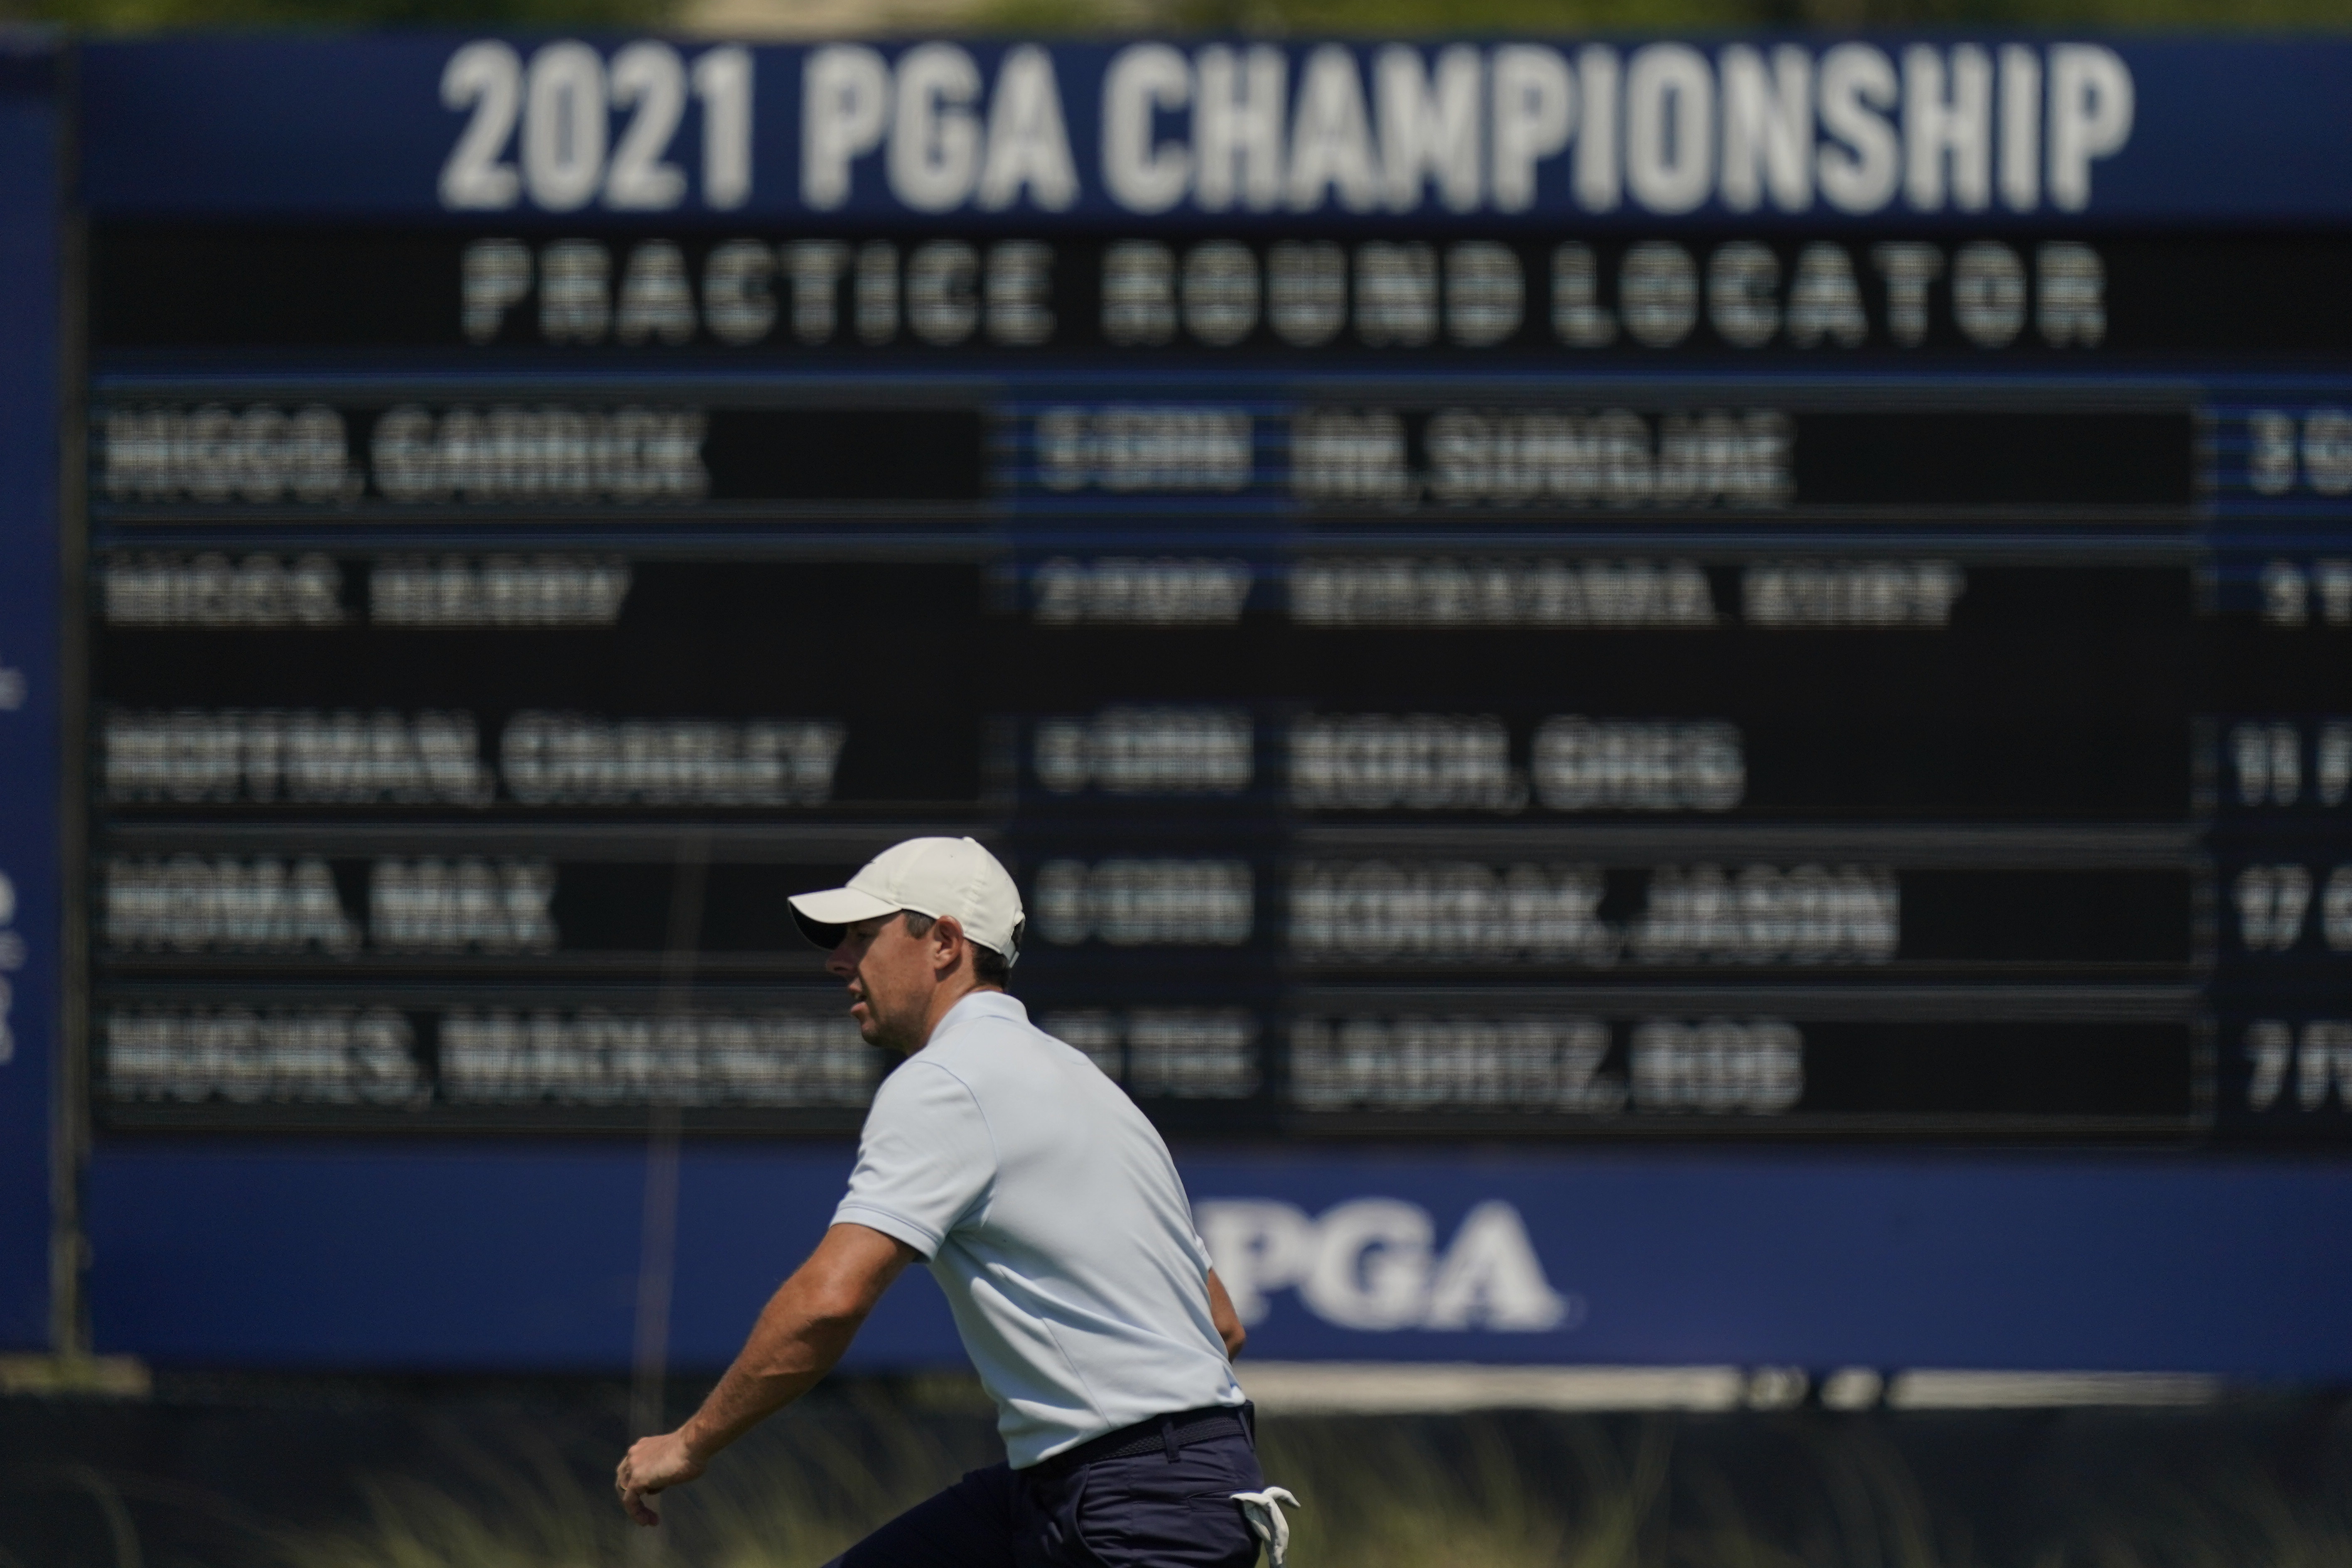 How to watch PGA Championship 2021 FREE live streams, dates, times, USA TV, channels for golf major